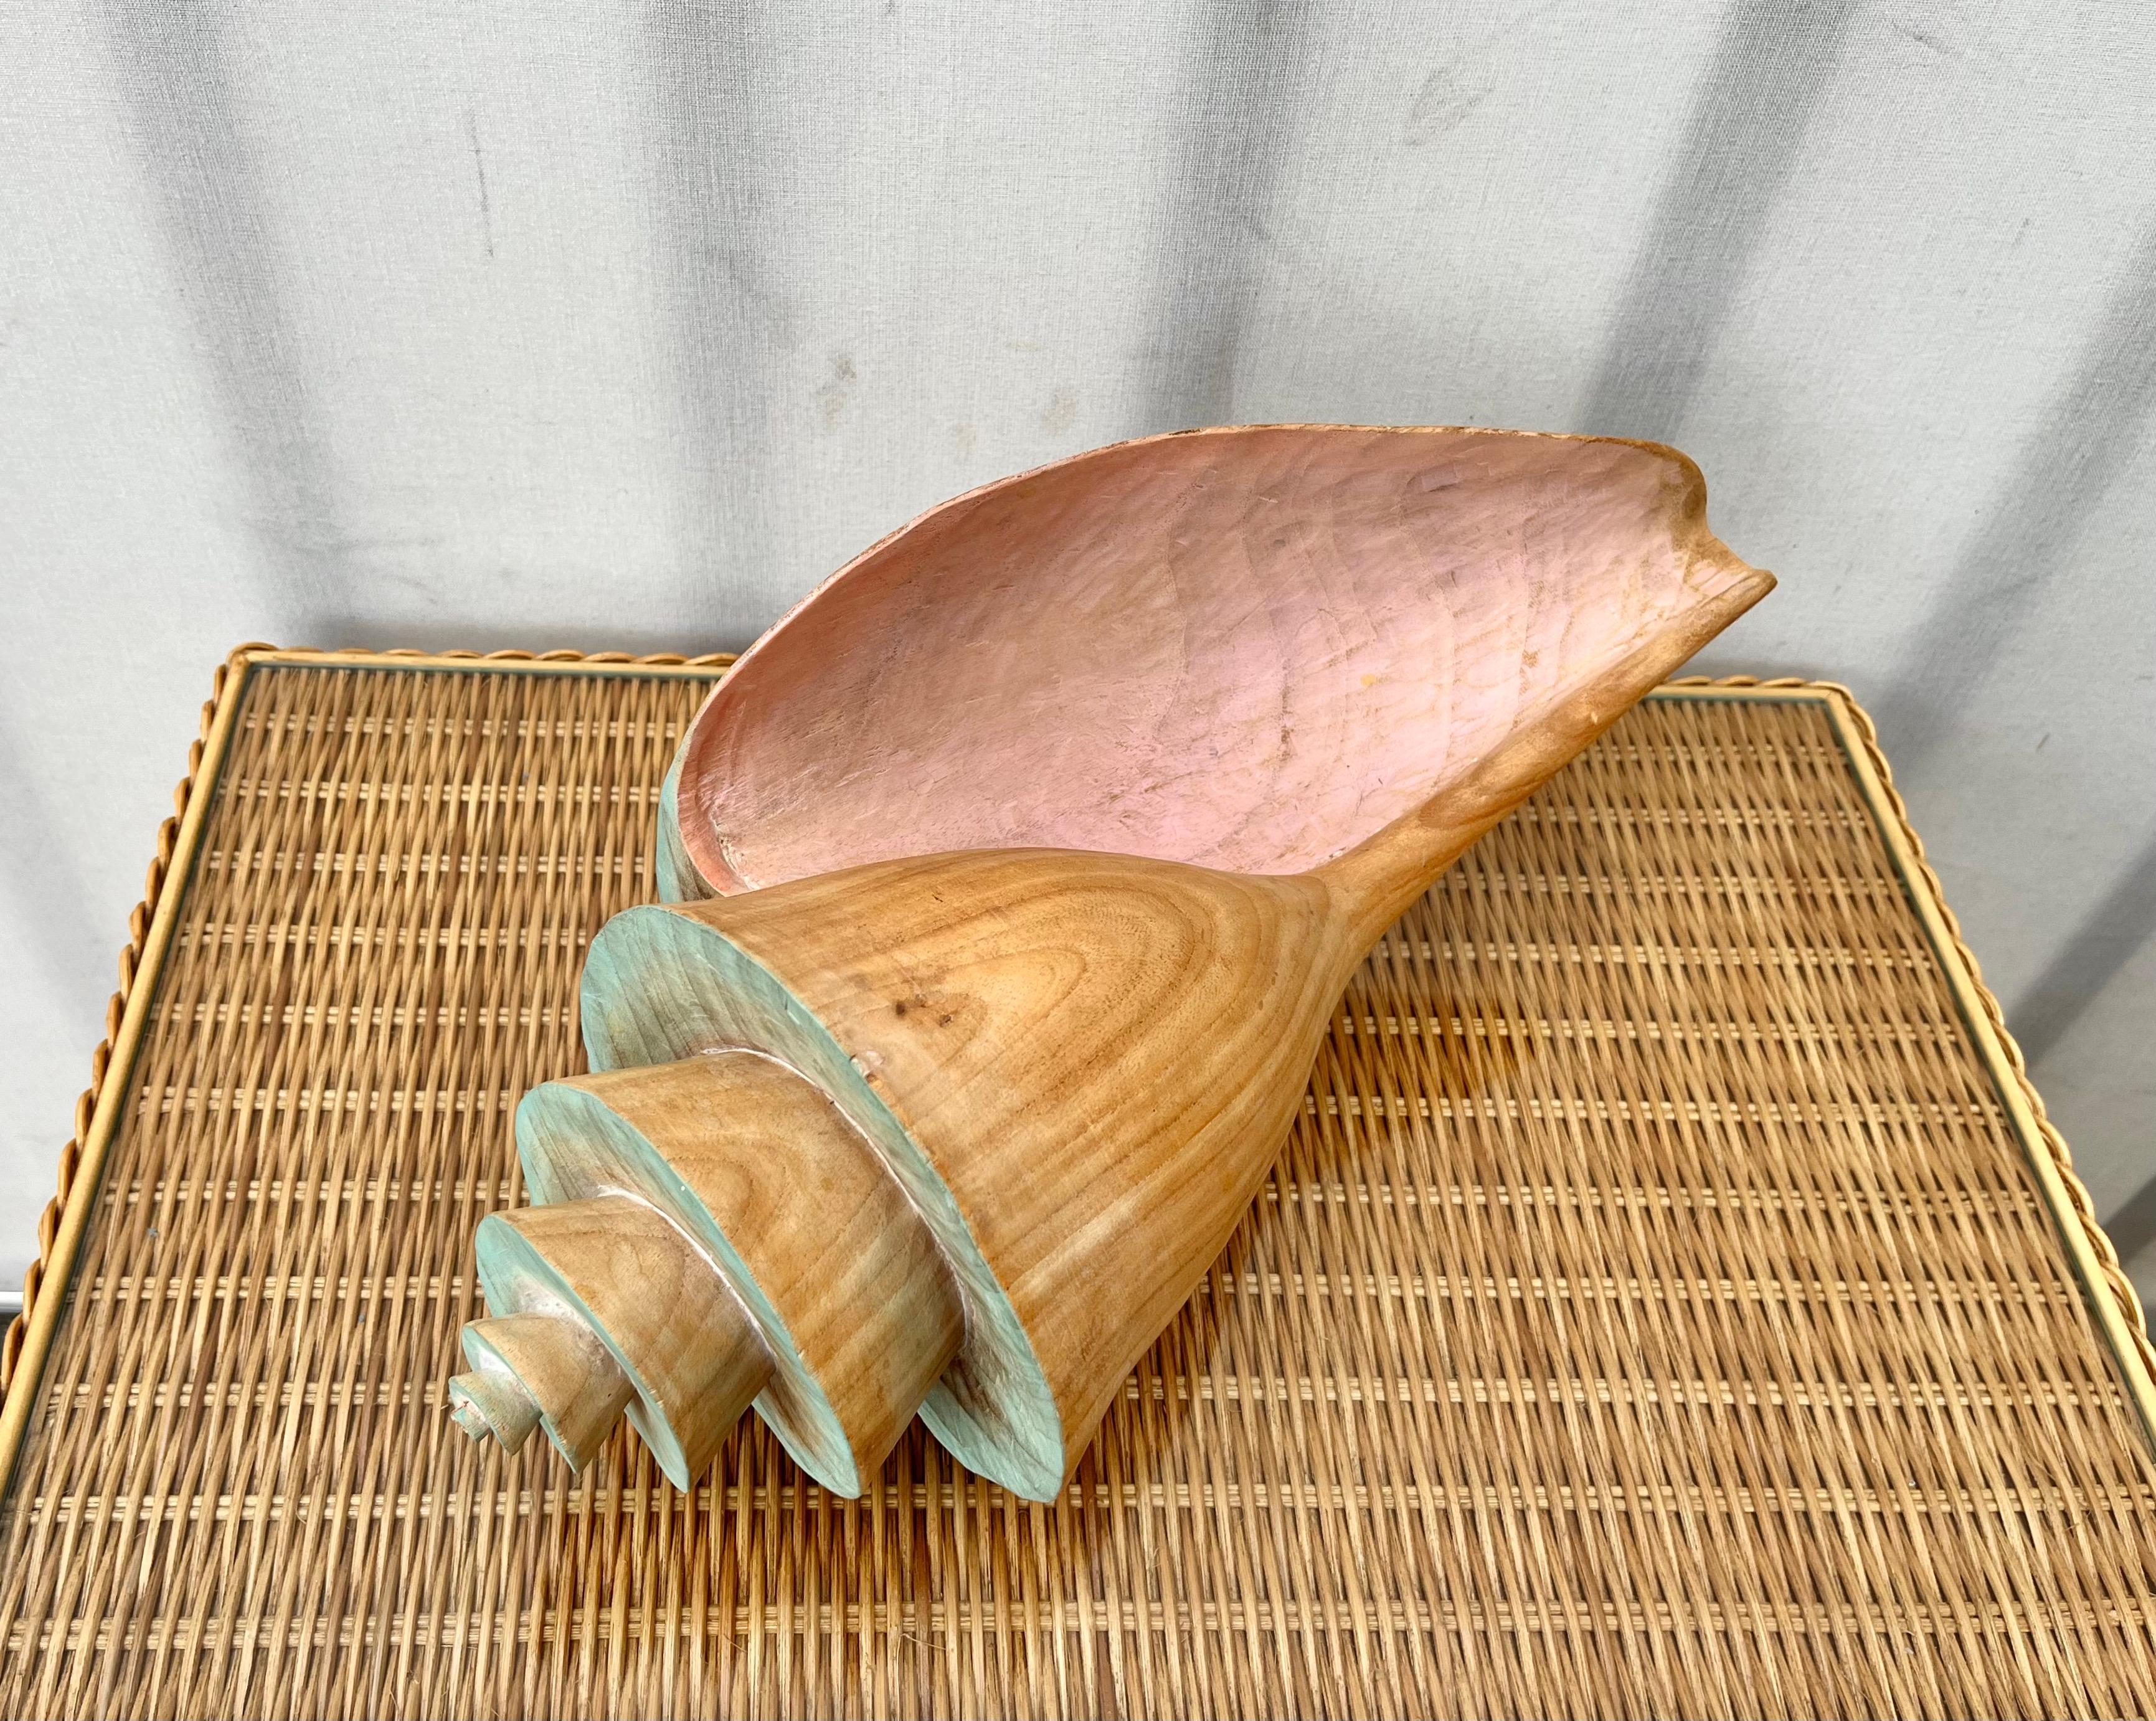 Hollywood Regency 1980s Large Coastal Style Carved Wood Conch Seashell Sculpture. 